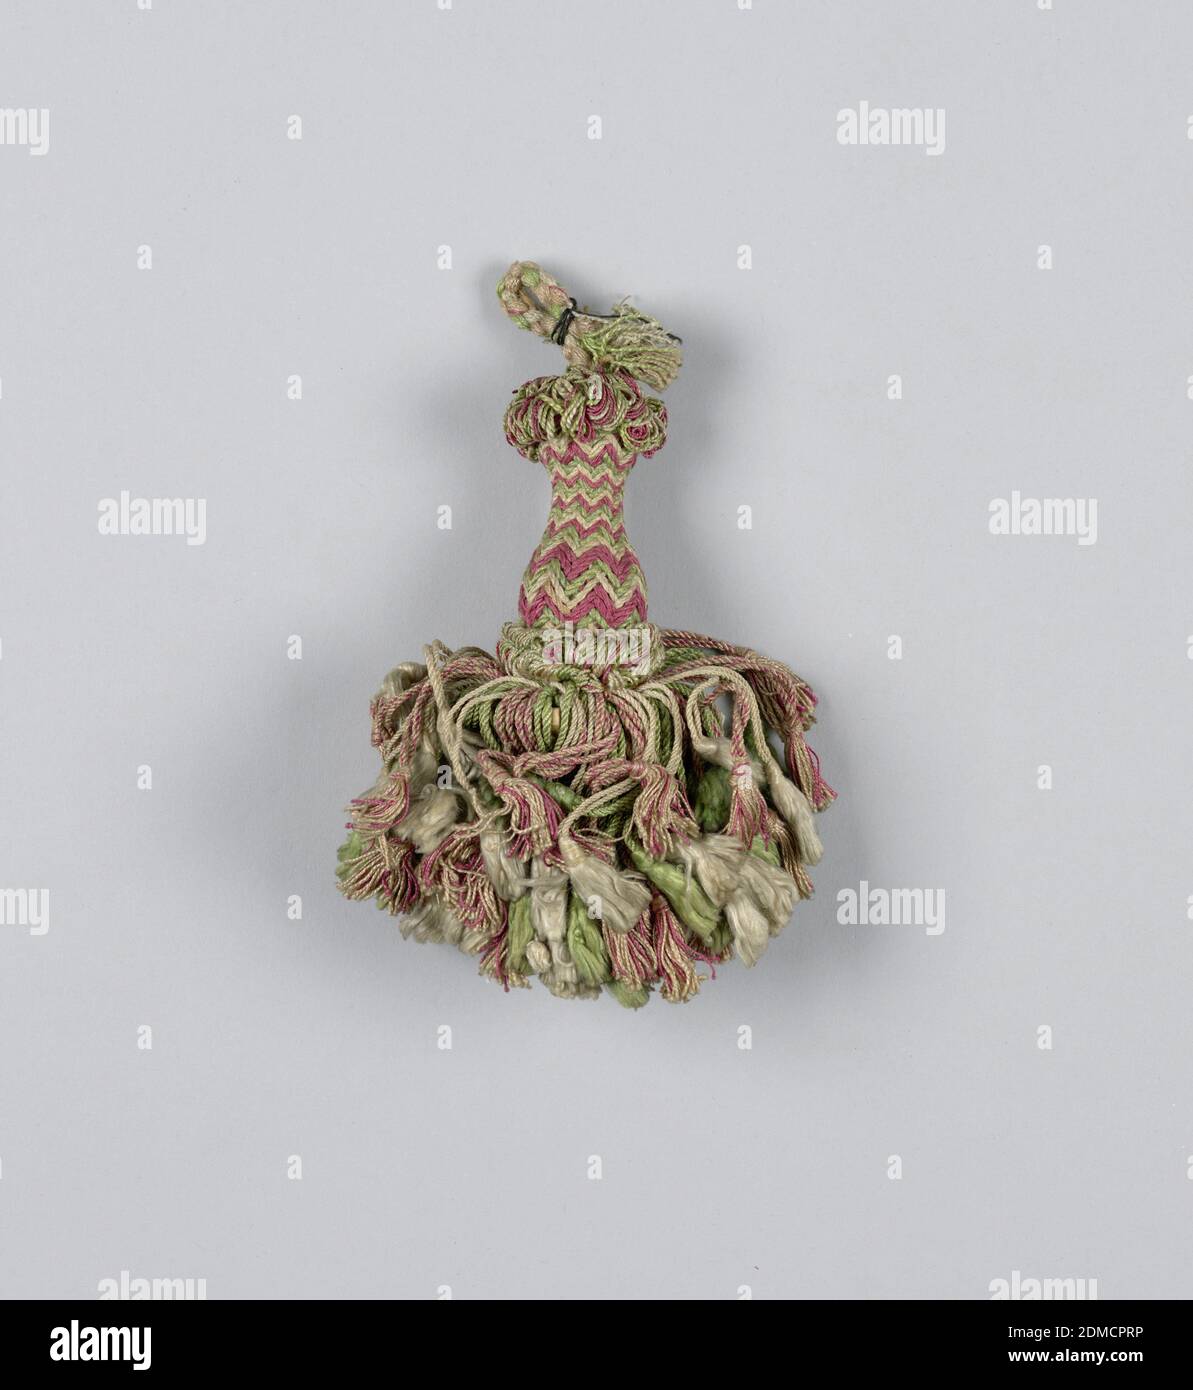 Tassel, Medium: silk, wooden core, Skirt of pink, white and green silk threads, twisted and looped, and each supporting a tassel of its own color. Head is vase-shaped and wrapped in pink, white and green threads in a chevron pattern. Collars are formed by looped threads at the top and bottom. Cord of braided silk threads., Spain, 19th century, trimmings, Tassel Stock Photo